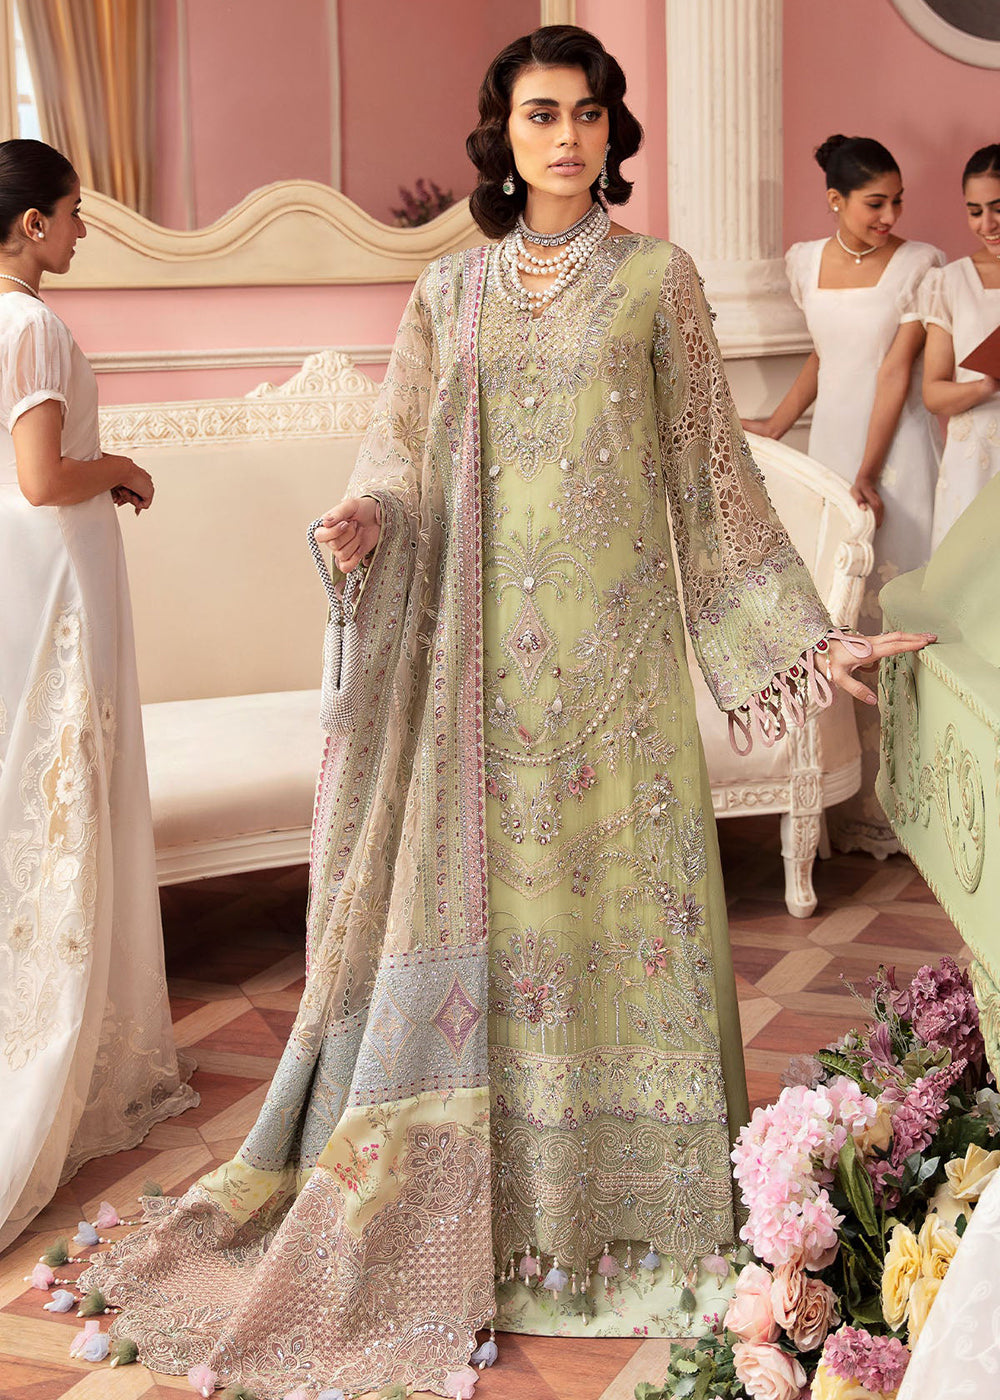 Buy Now The Secret Garden Luxury Unstitched Formals '24 by Nureh | MARY Online at Empress Online in USA, UK, Canada & Worldwide at Empress Clothing.